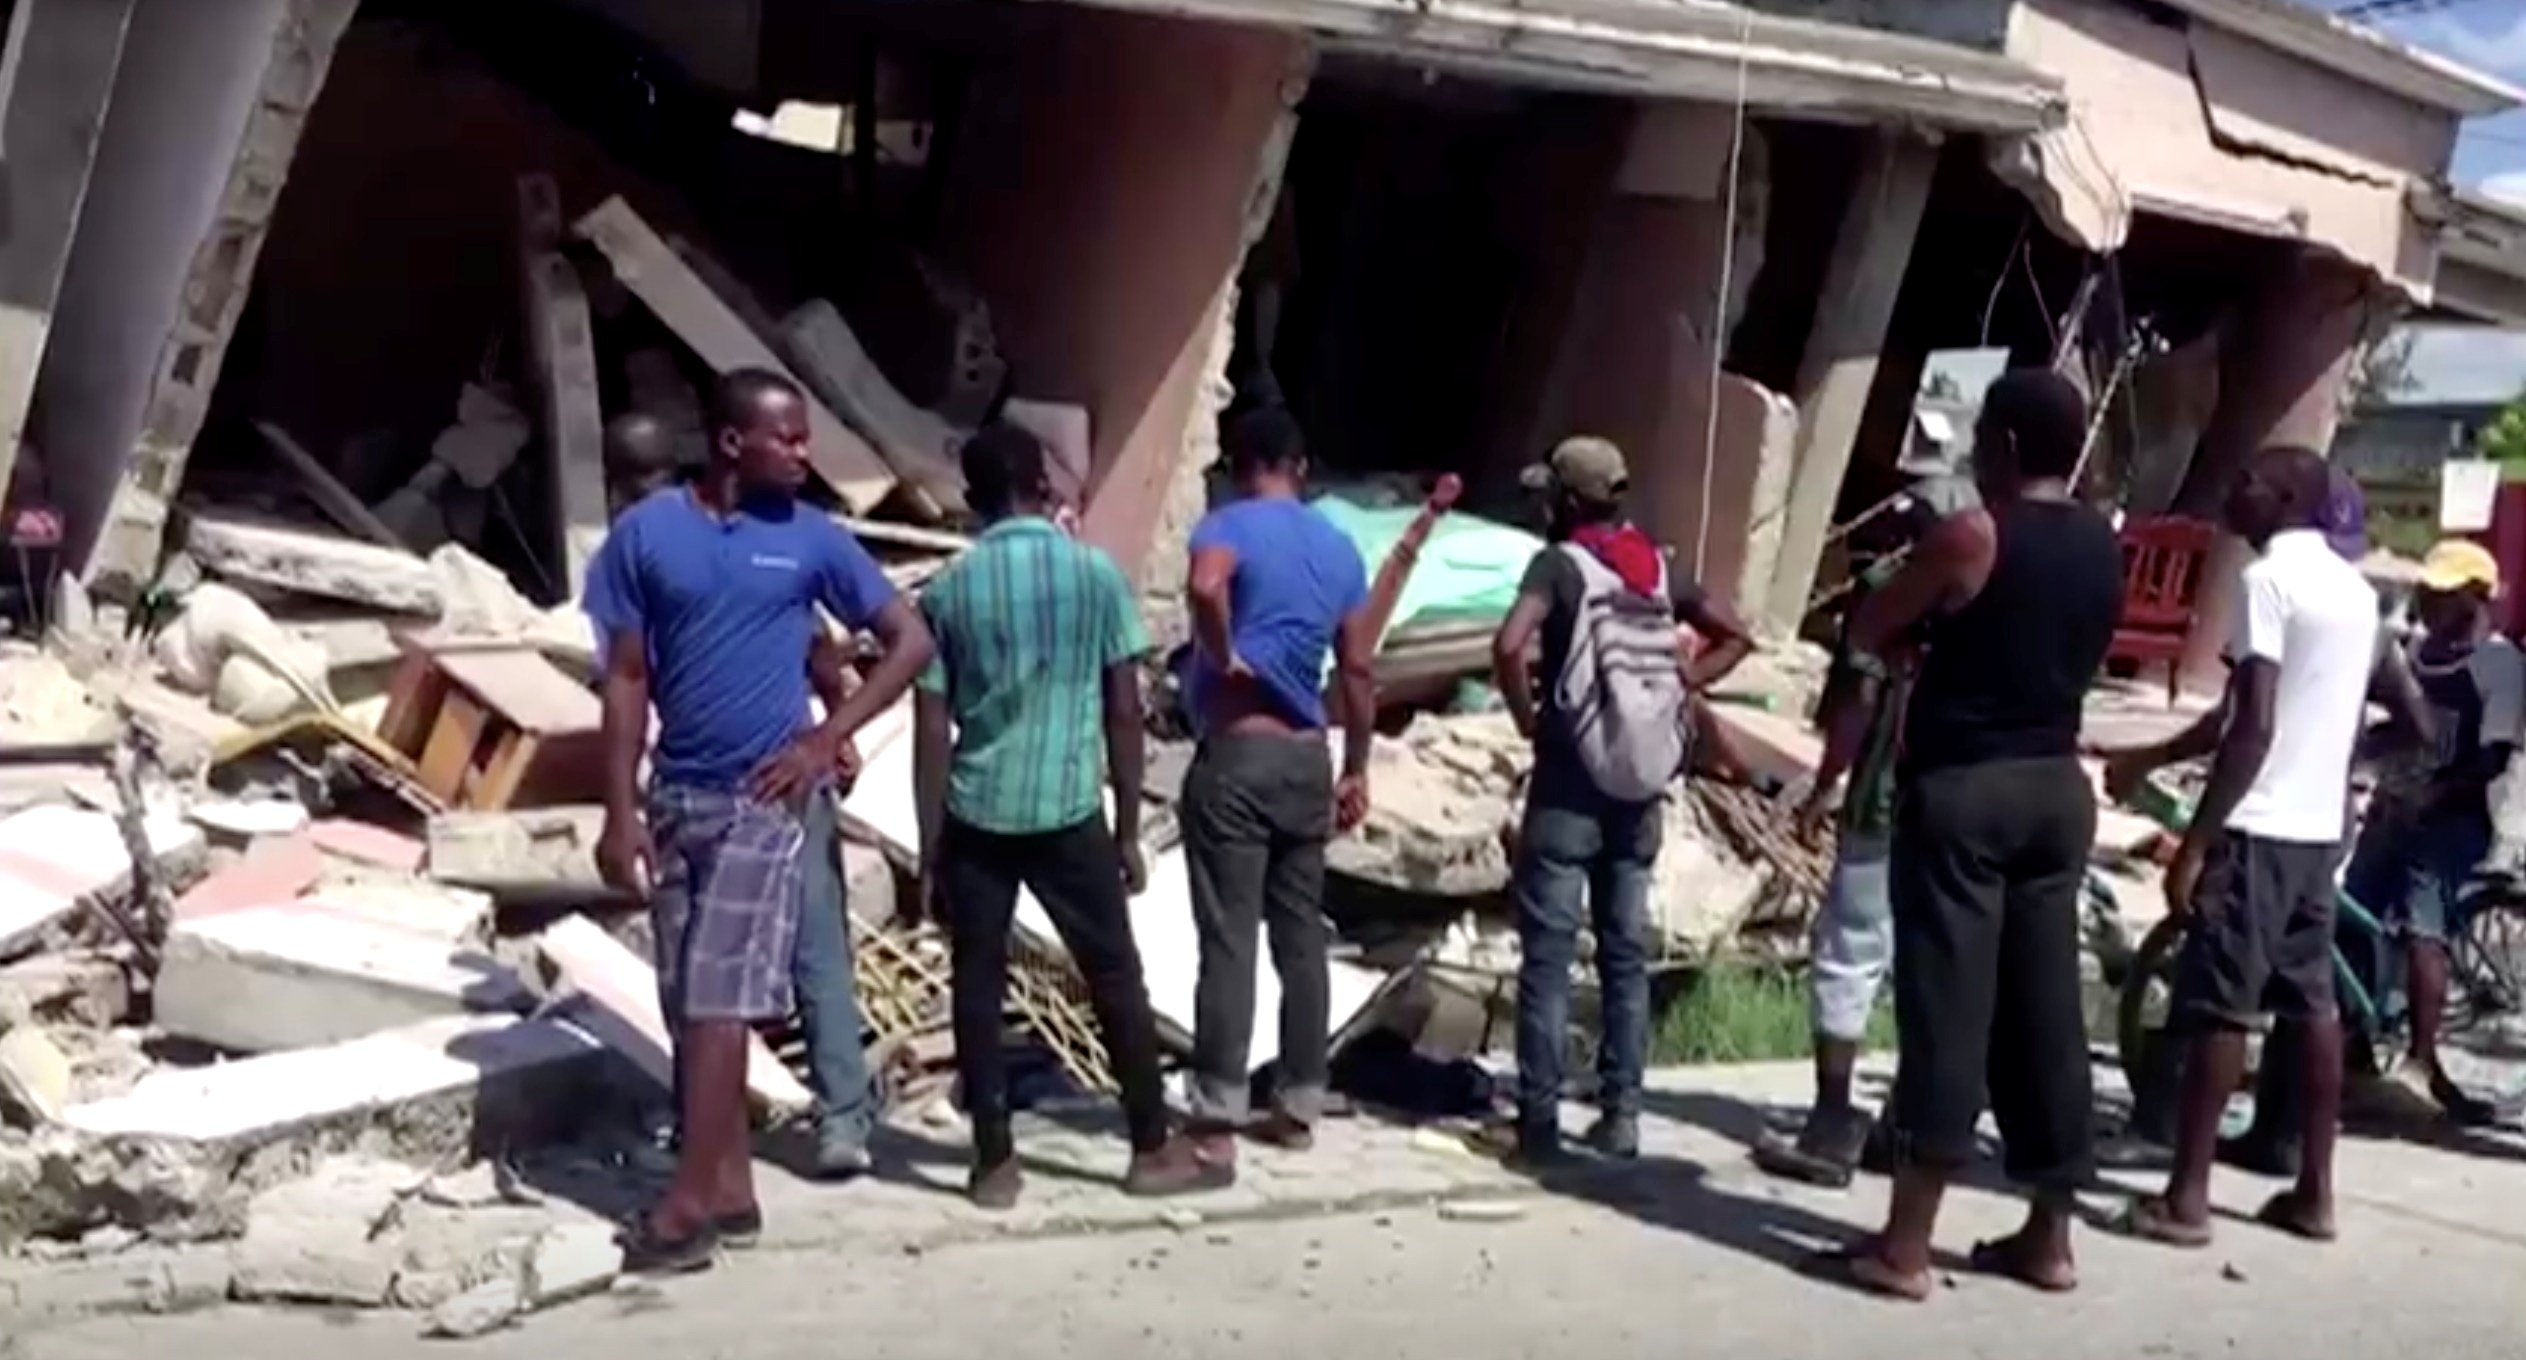 People stand in front of a collapsed building following an earthquake, in Les Cayes, Haiti, in this still image taken from a video obtained by Reuters on August 14, 2021.   (Reuters TV via Reuters)